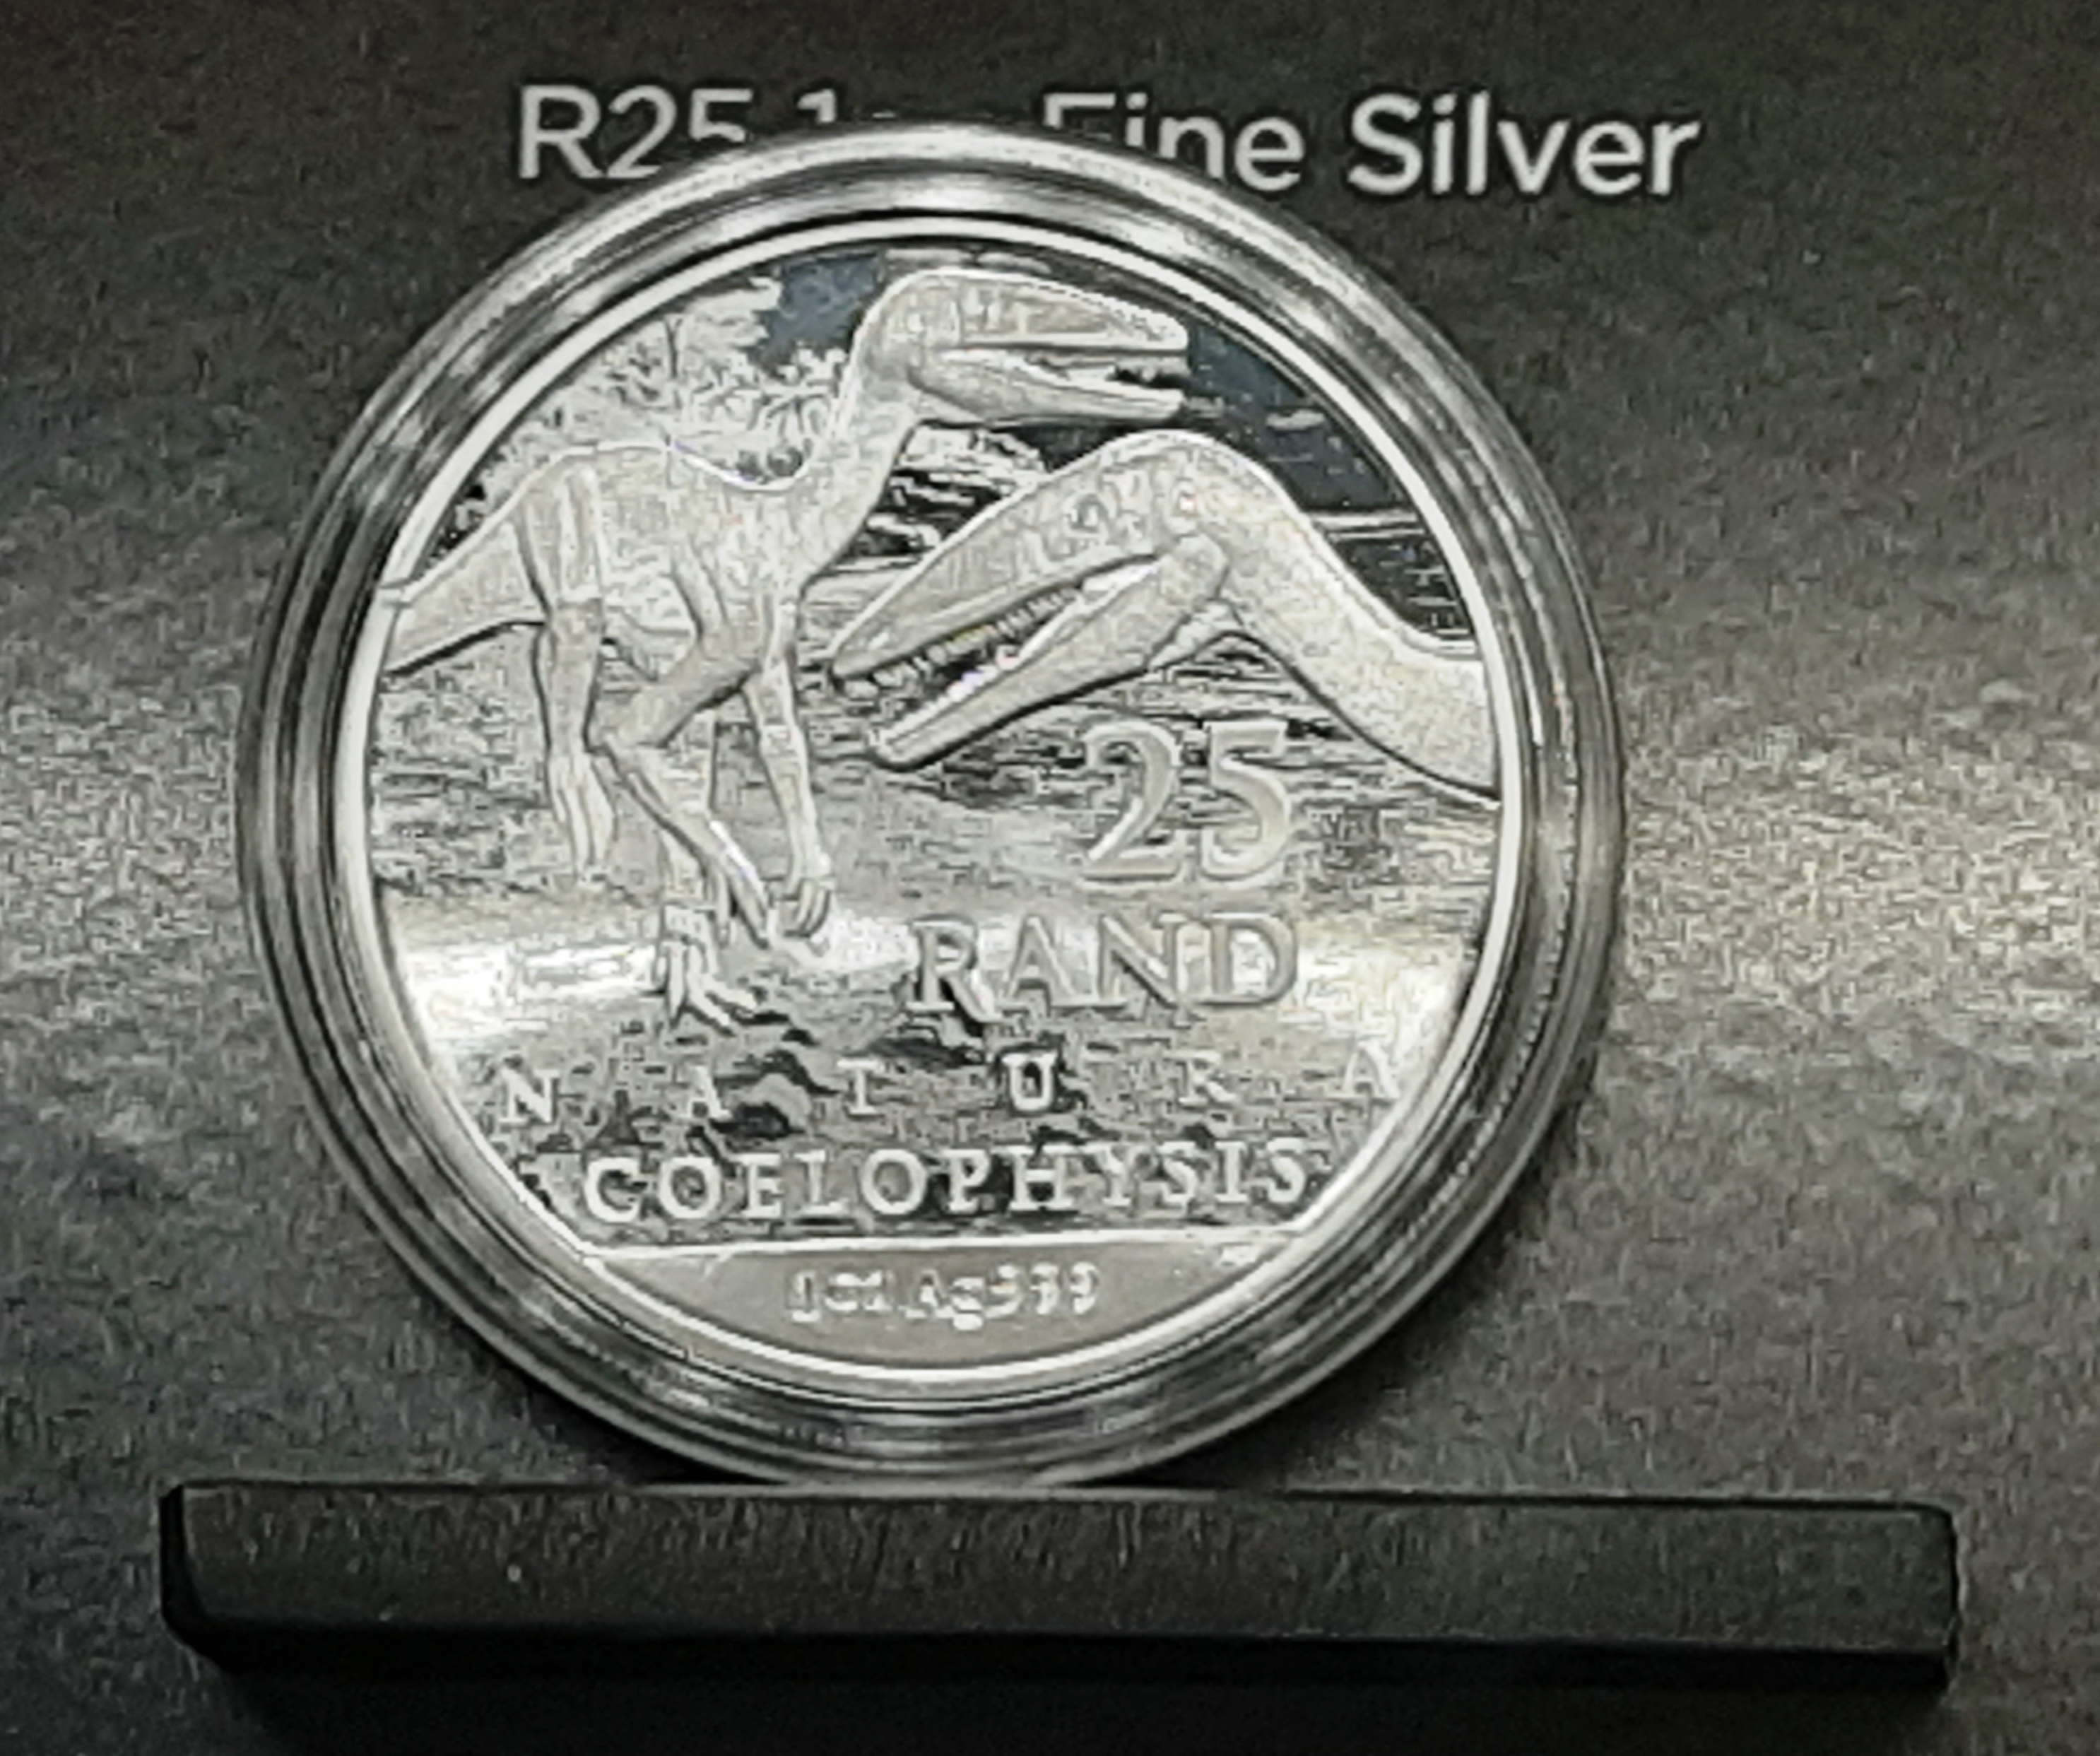 2020 south african numismatic program: Return of the big five!